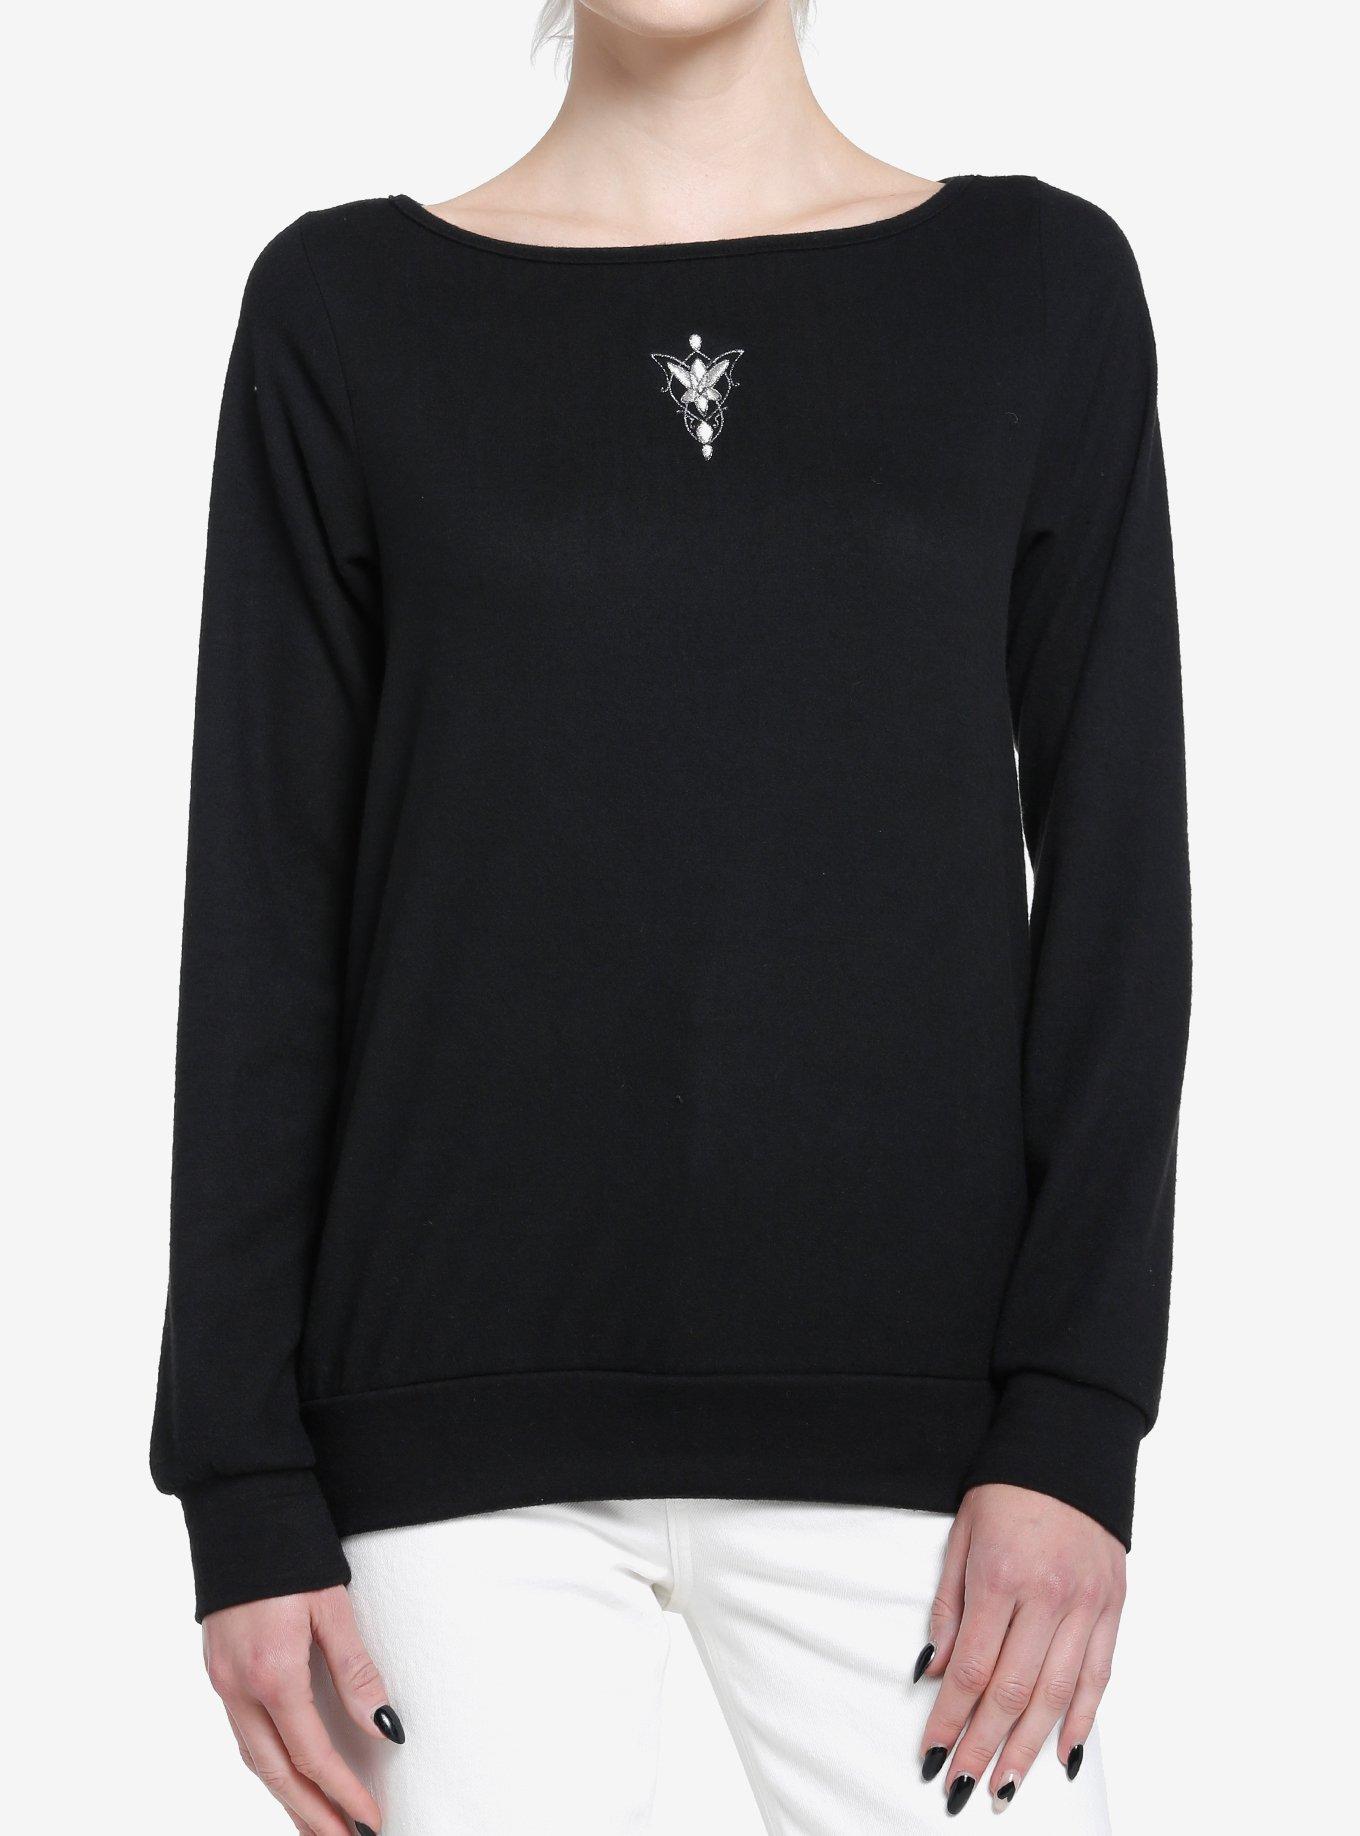 Her Universe The Lord Of The Rings Arwen Evenstar Sweater Her Universe Exclusive, MULTI, hi-res